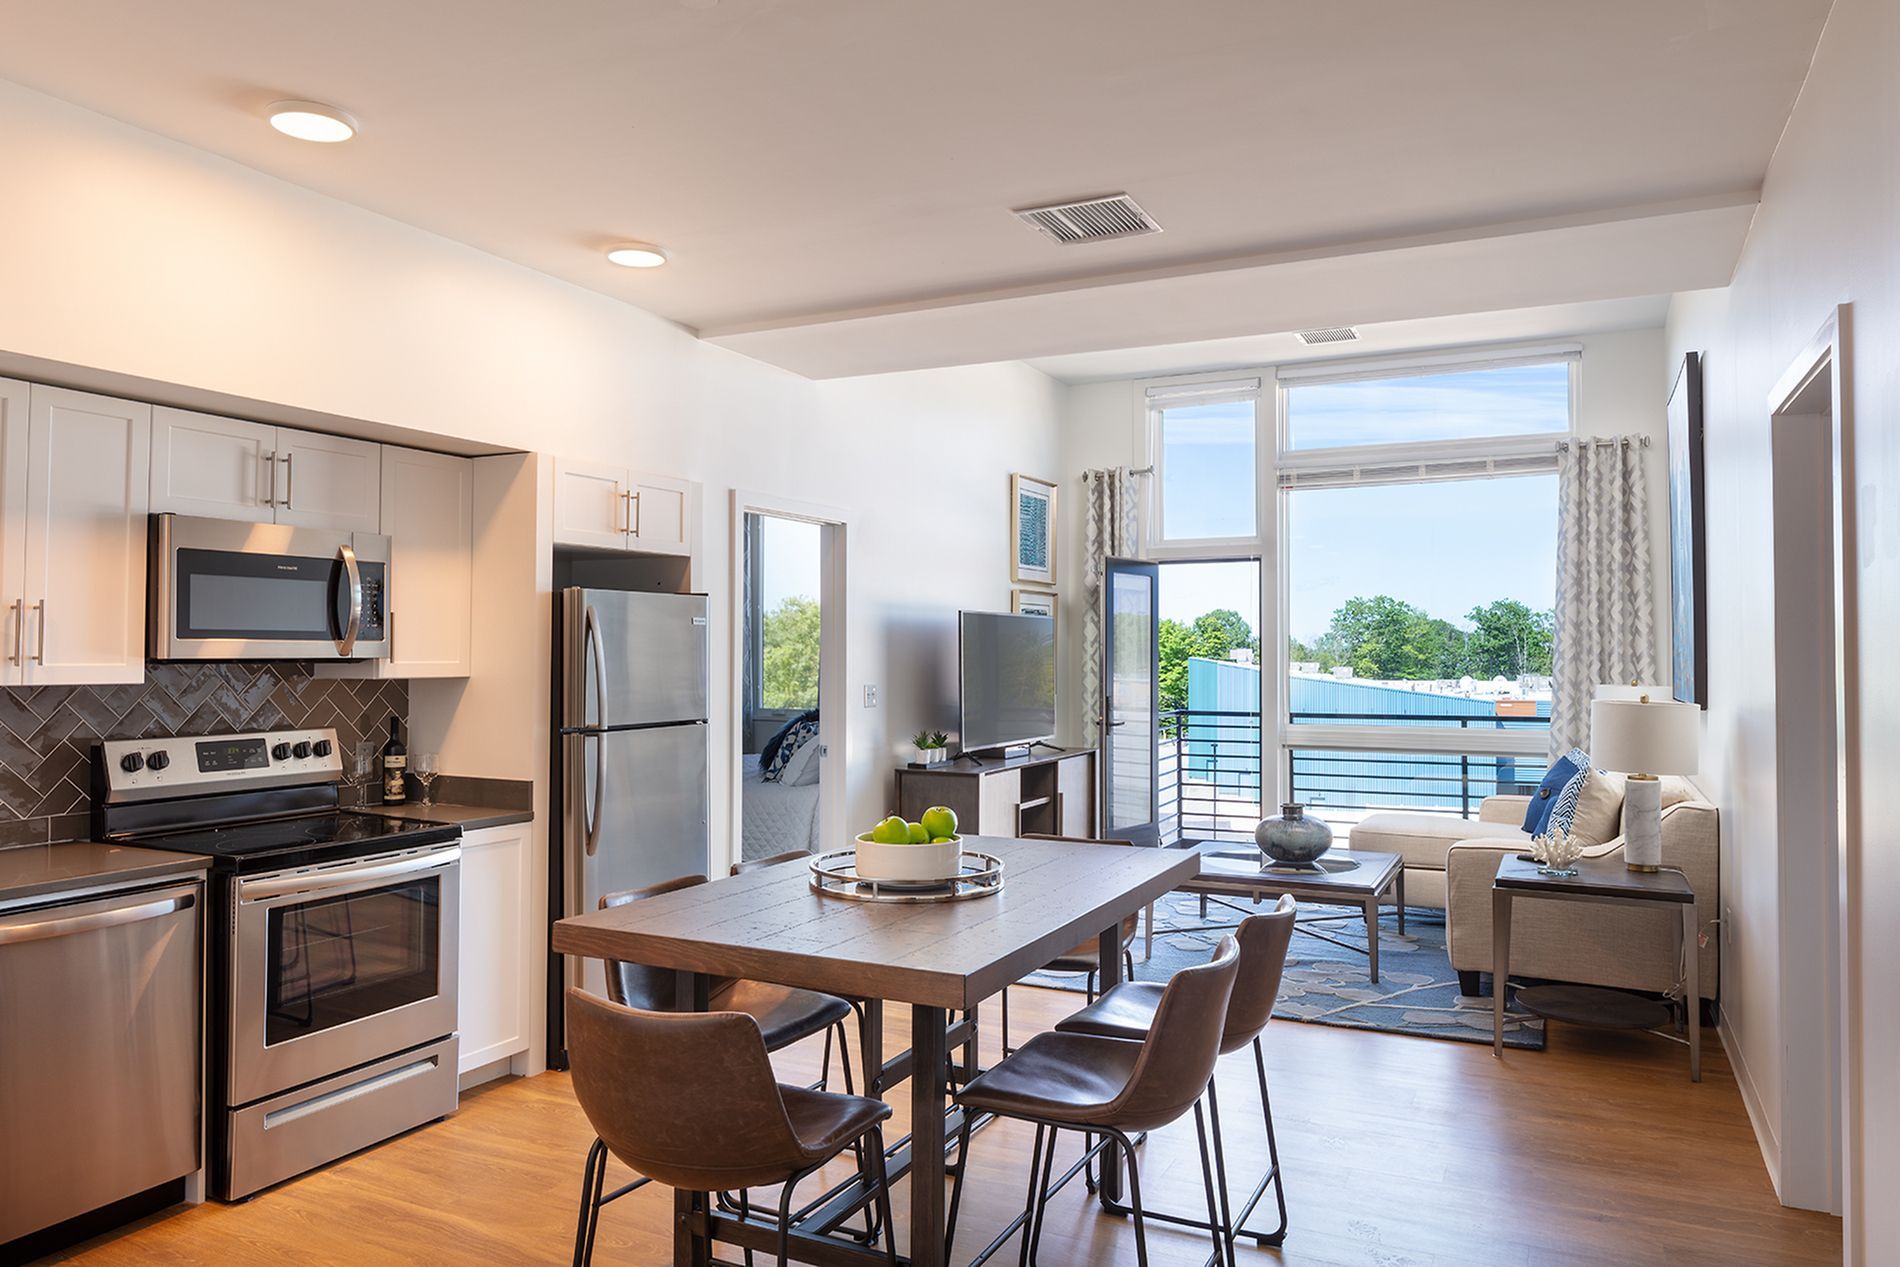 Kitchen, Dining Area, & Living Room at The Veridian Residences.